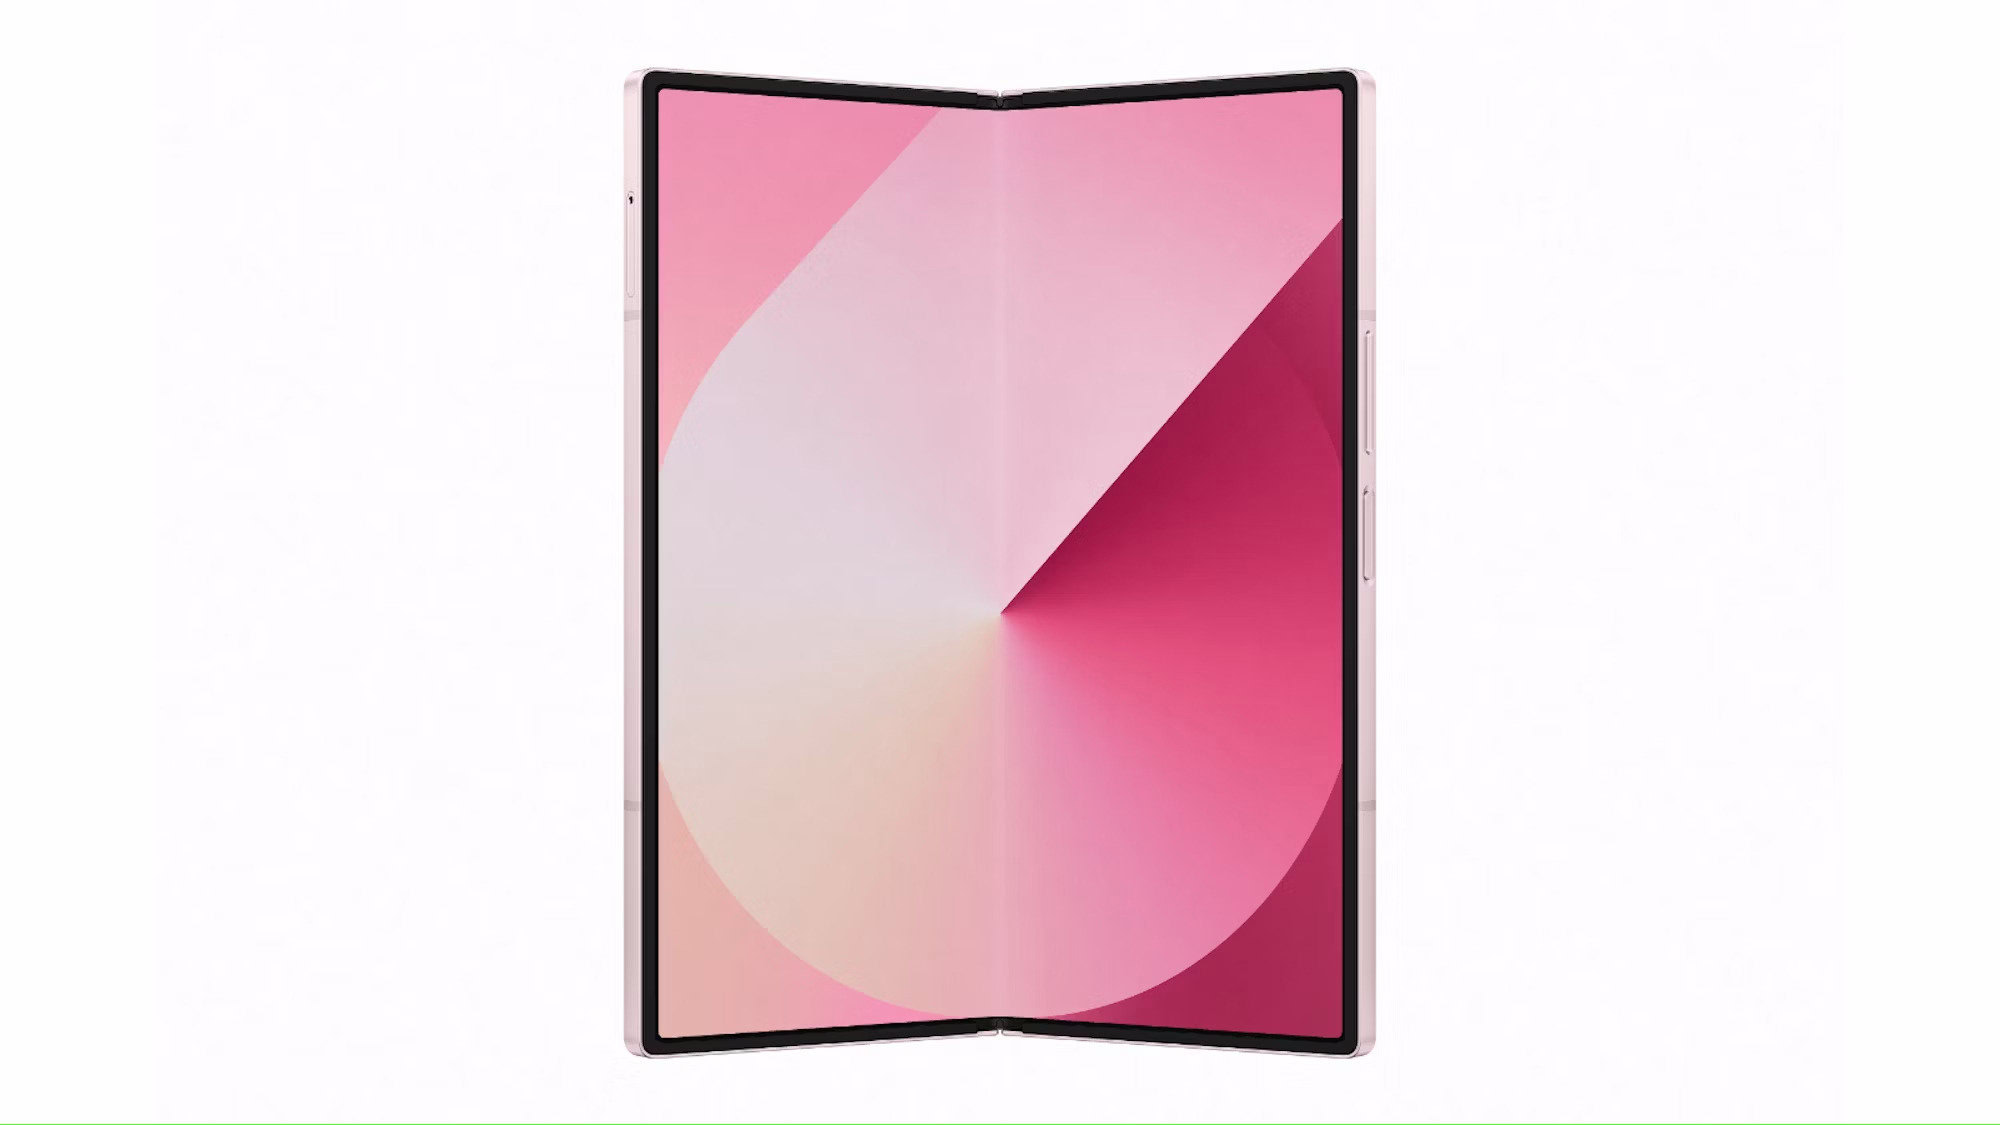 Download the Samsung Galaxy Z Fold 6 wallpapers here